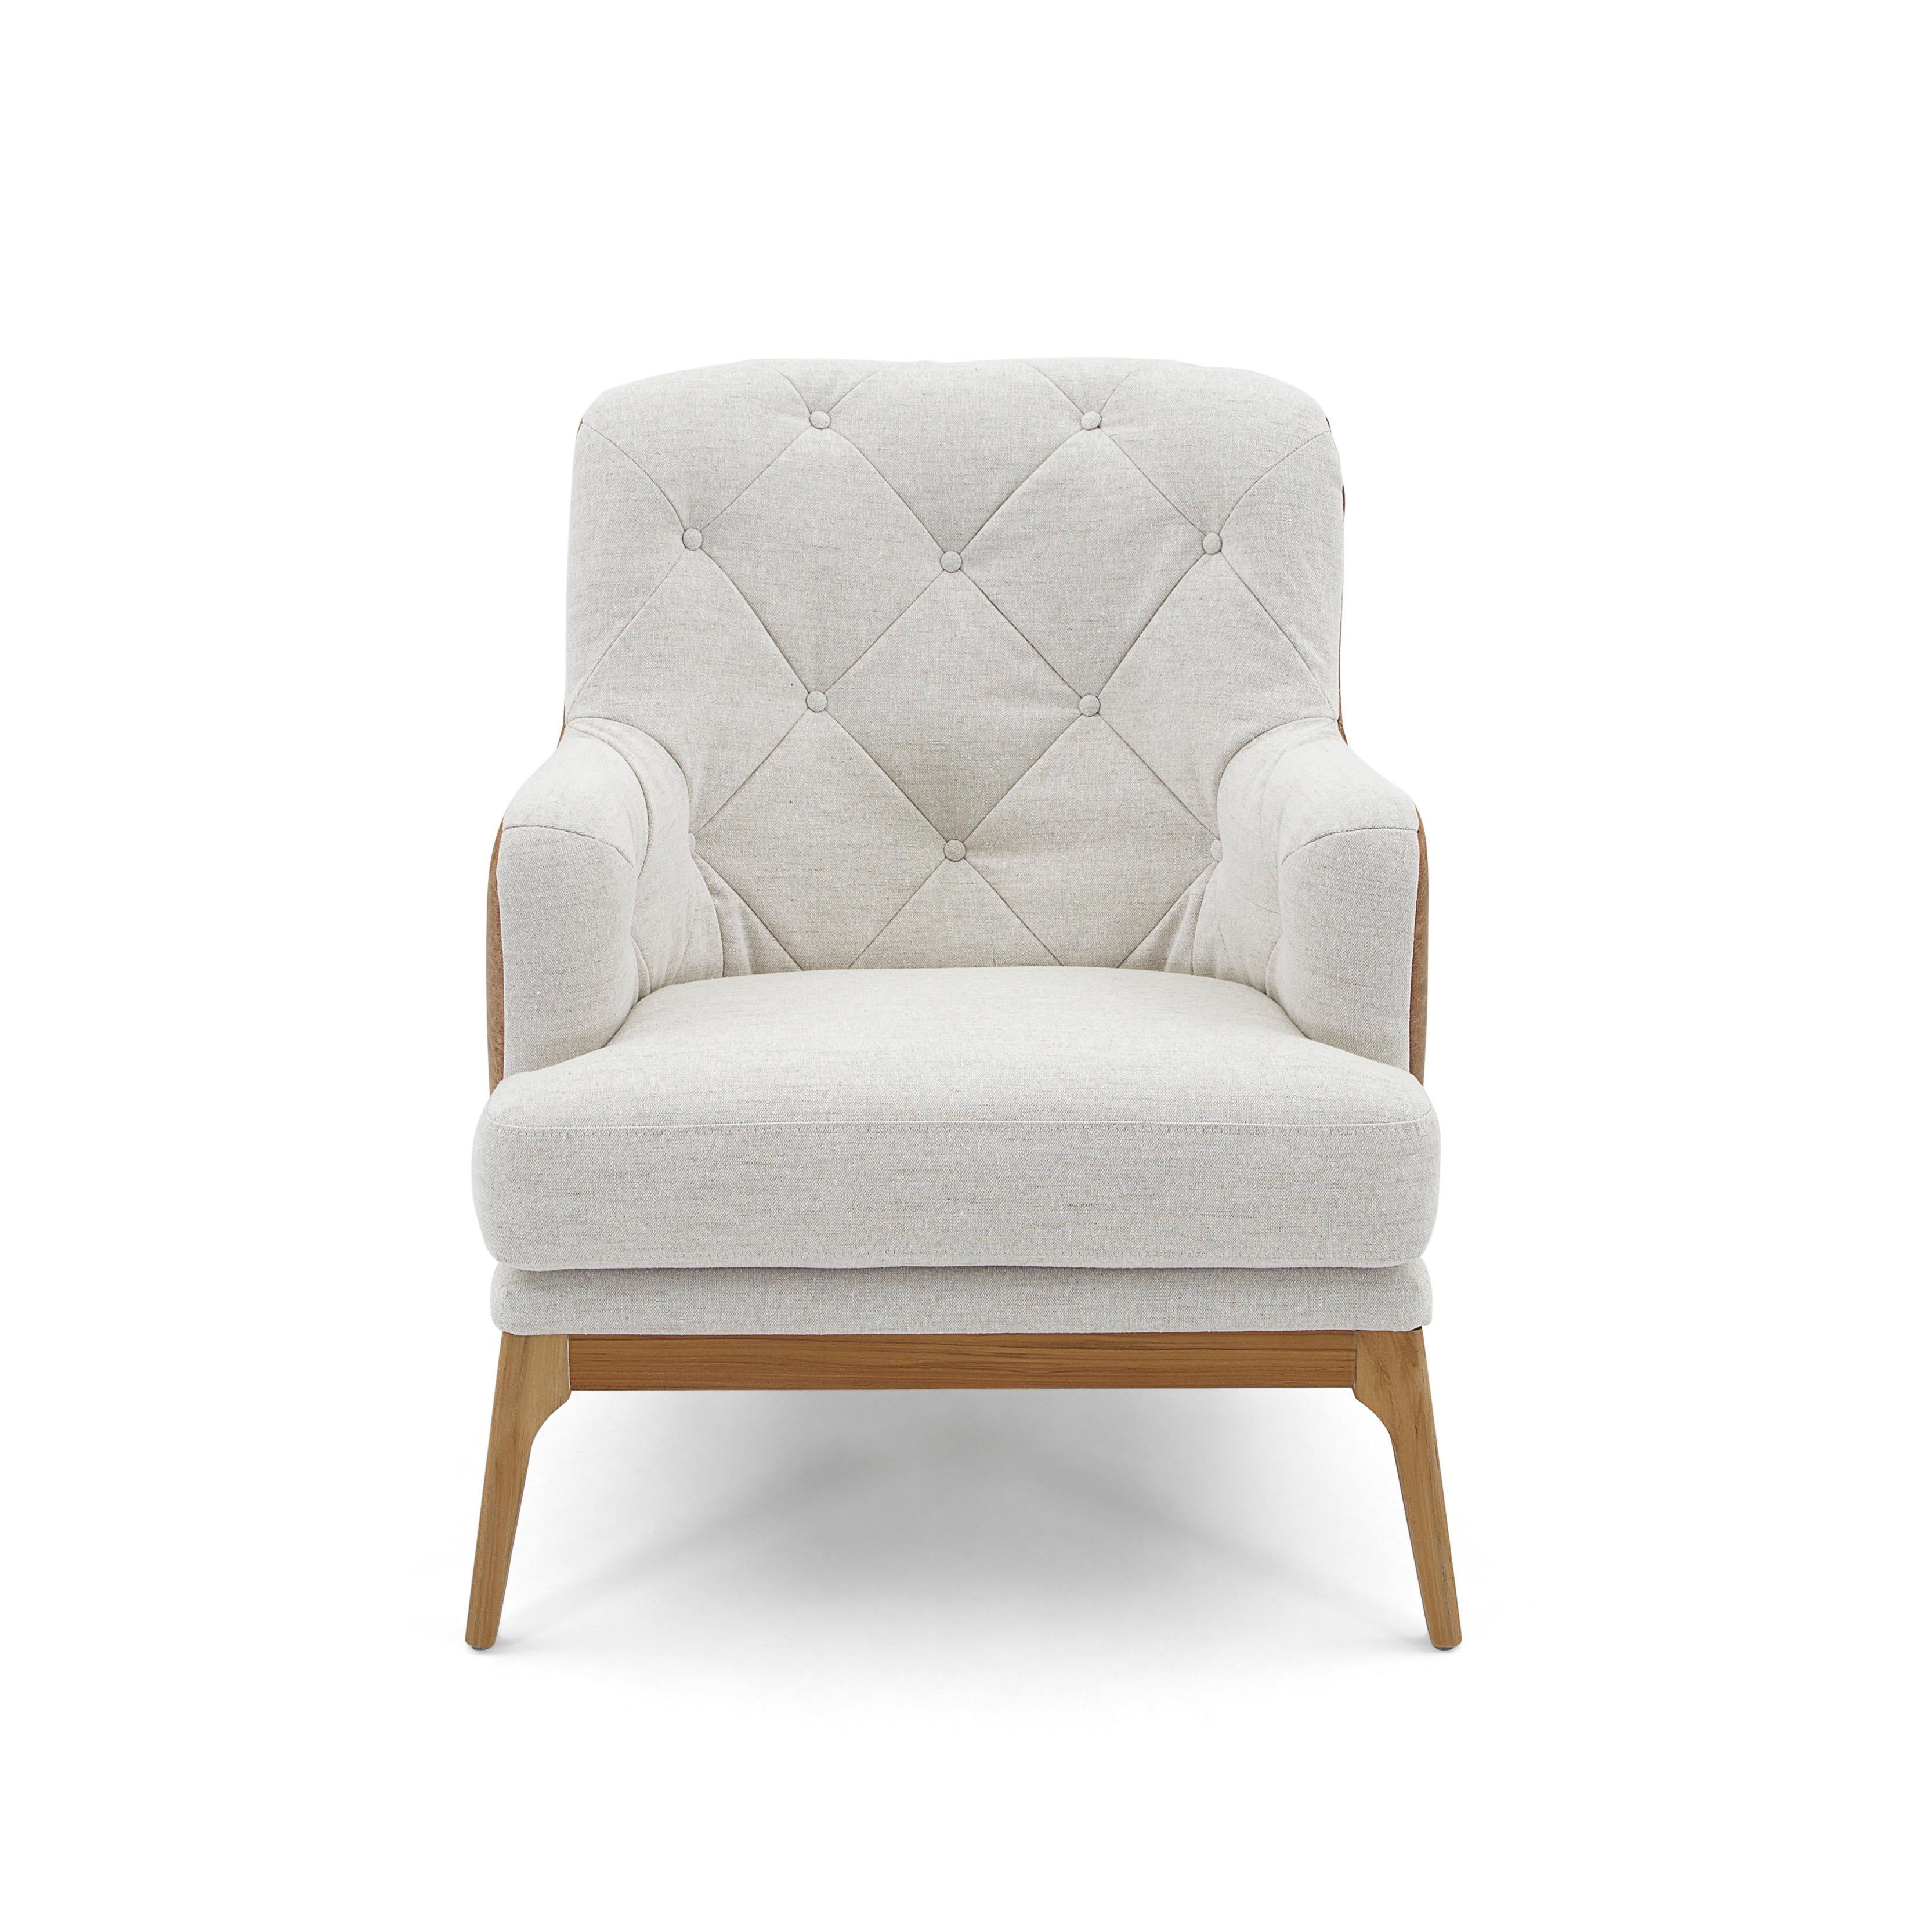 Athos Armchair Upholstered in Leather and Fabric in Teak Wood Finish In New Condition For Sale In Miami, FL